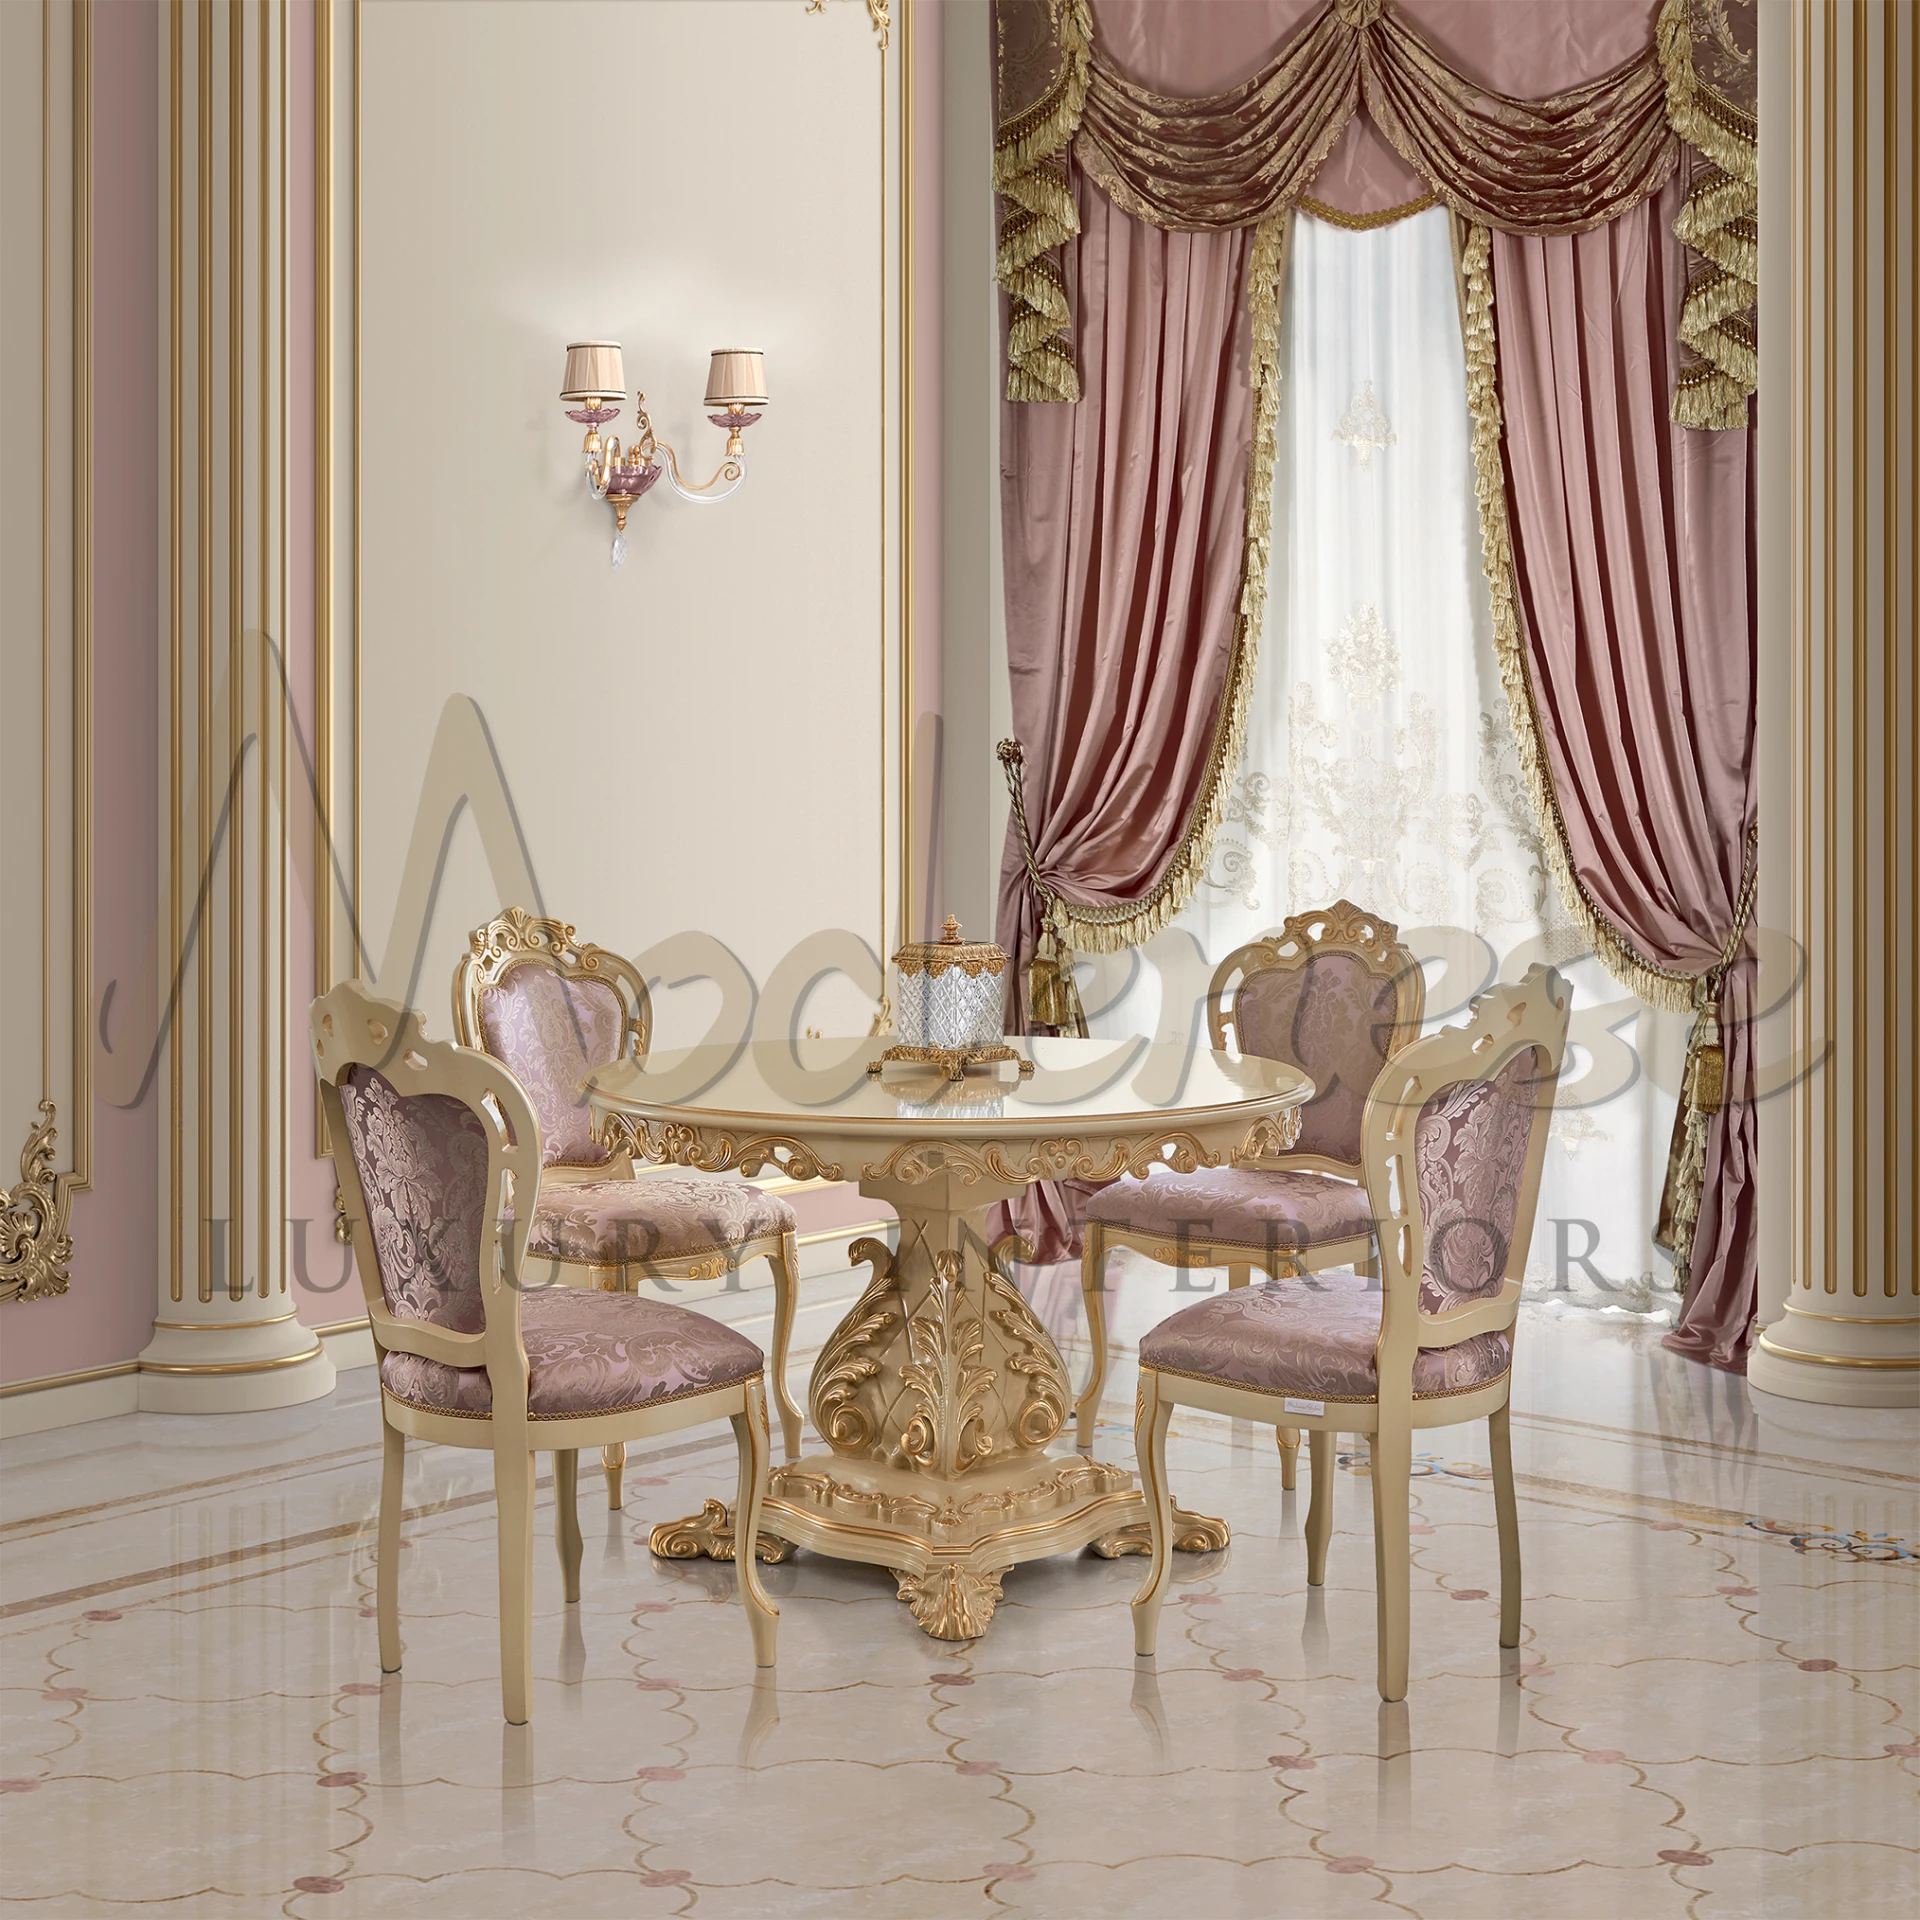 Luxurious Italian design Rococo central table with hand-gilded gold leaf, ideal for sophisticated classic interior settings.